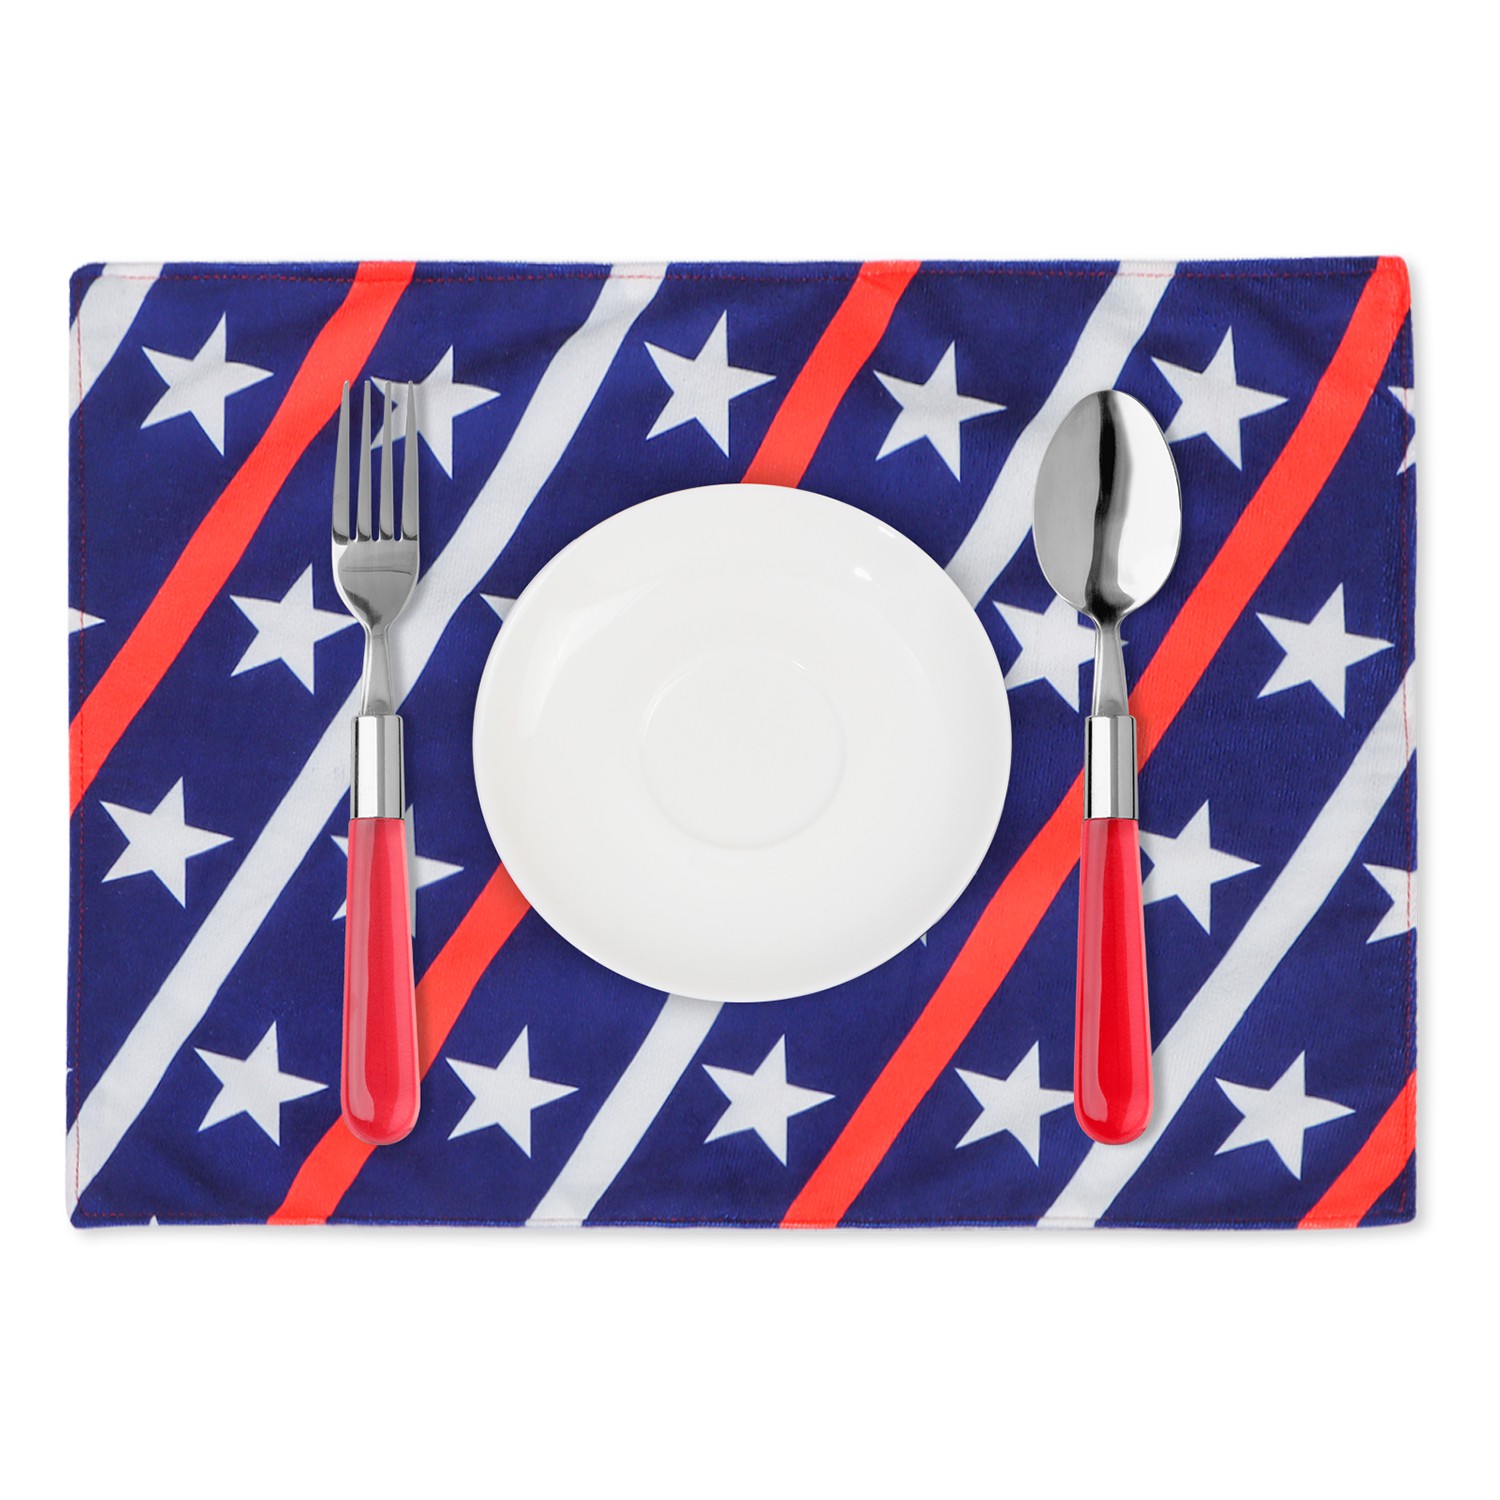 ❤LANSEL❤ 4pcs/set Kitchen Independence Day Non-Slip Table Place Mats Placemats Heat-Resistant Rectangle Table Decor Washable American Flag